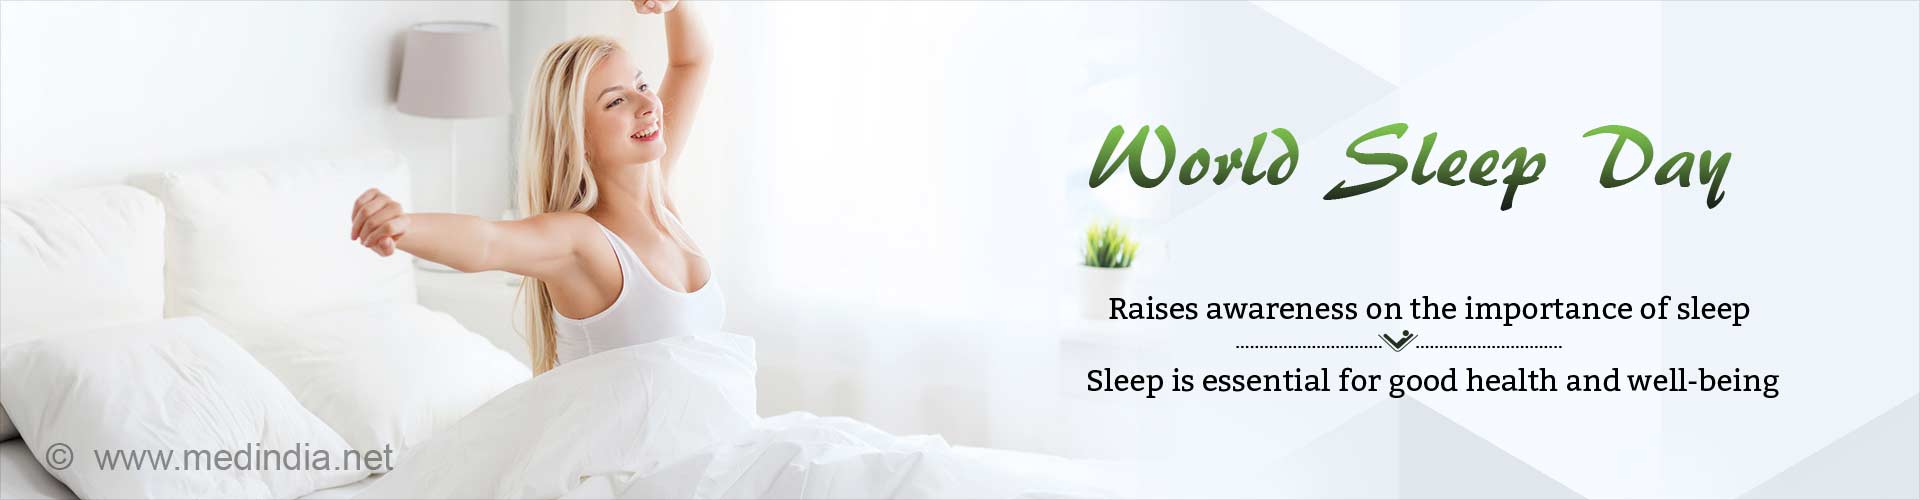 world sleep day
- raises awareness on the importance of sleep
- sleep is essential for good health and well-being